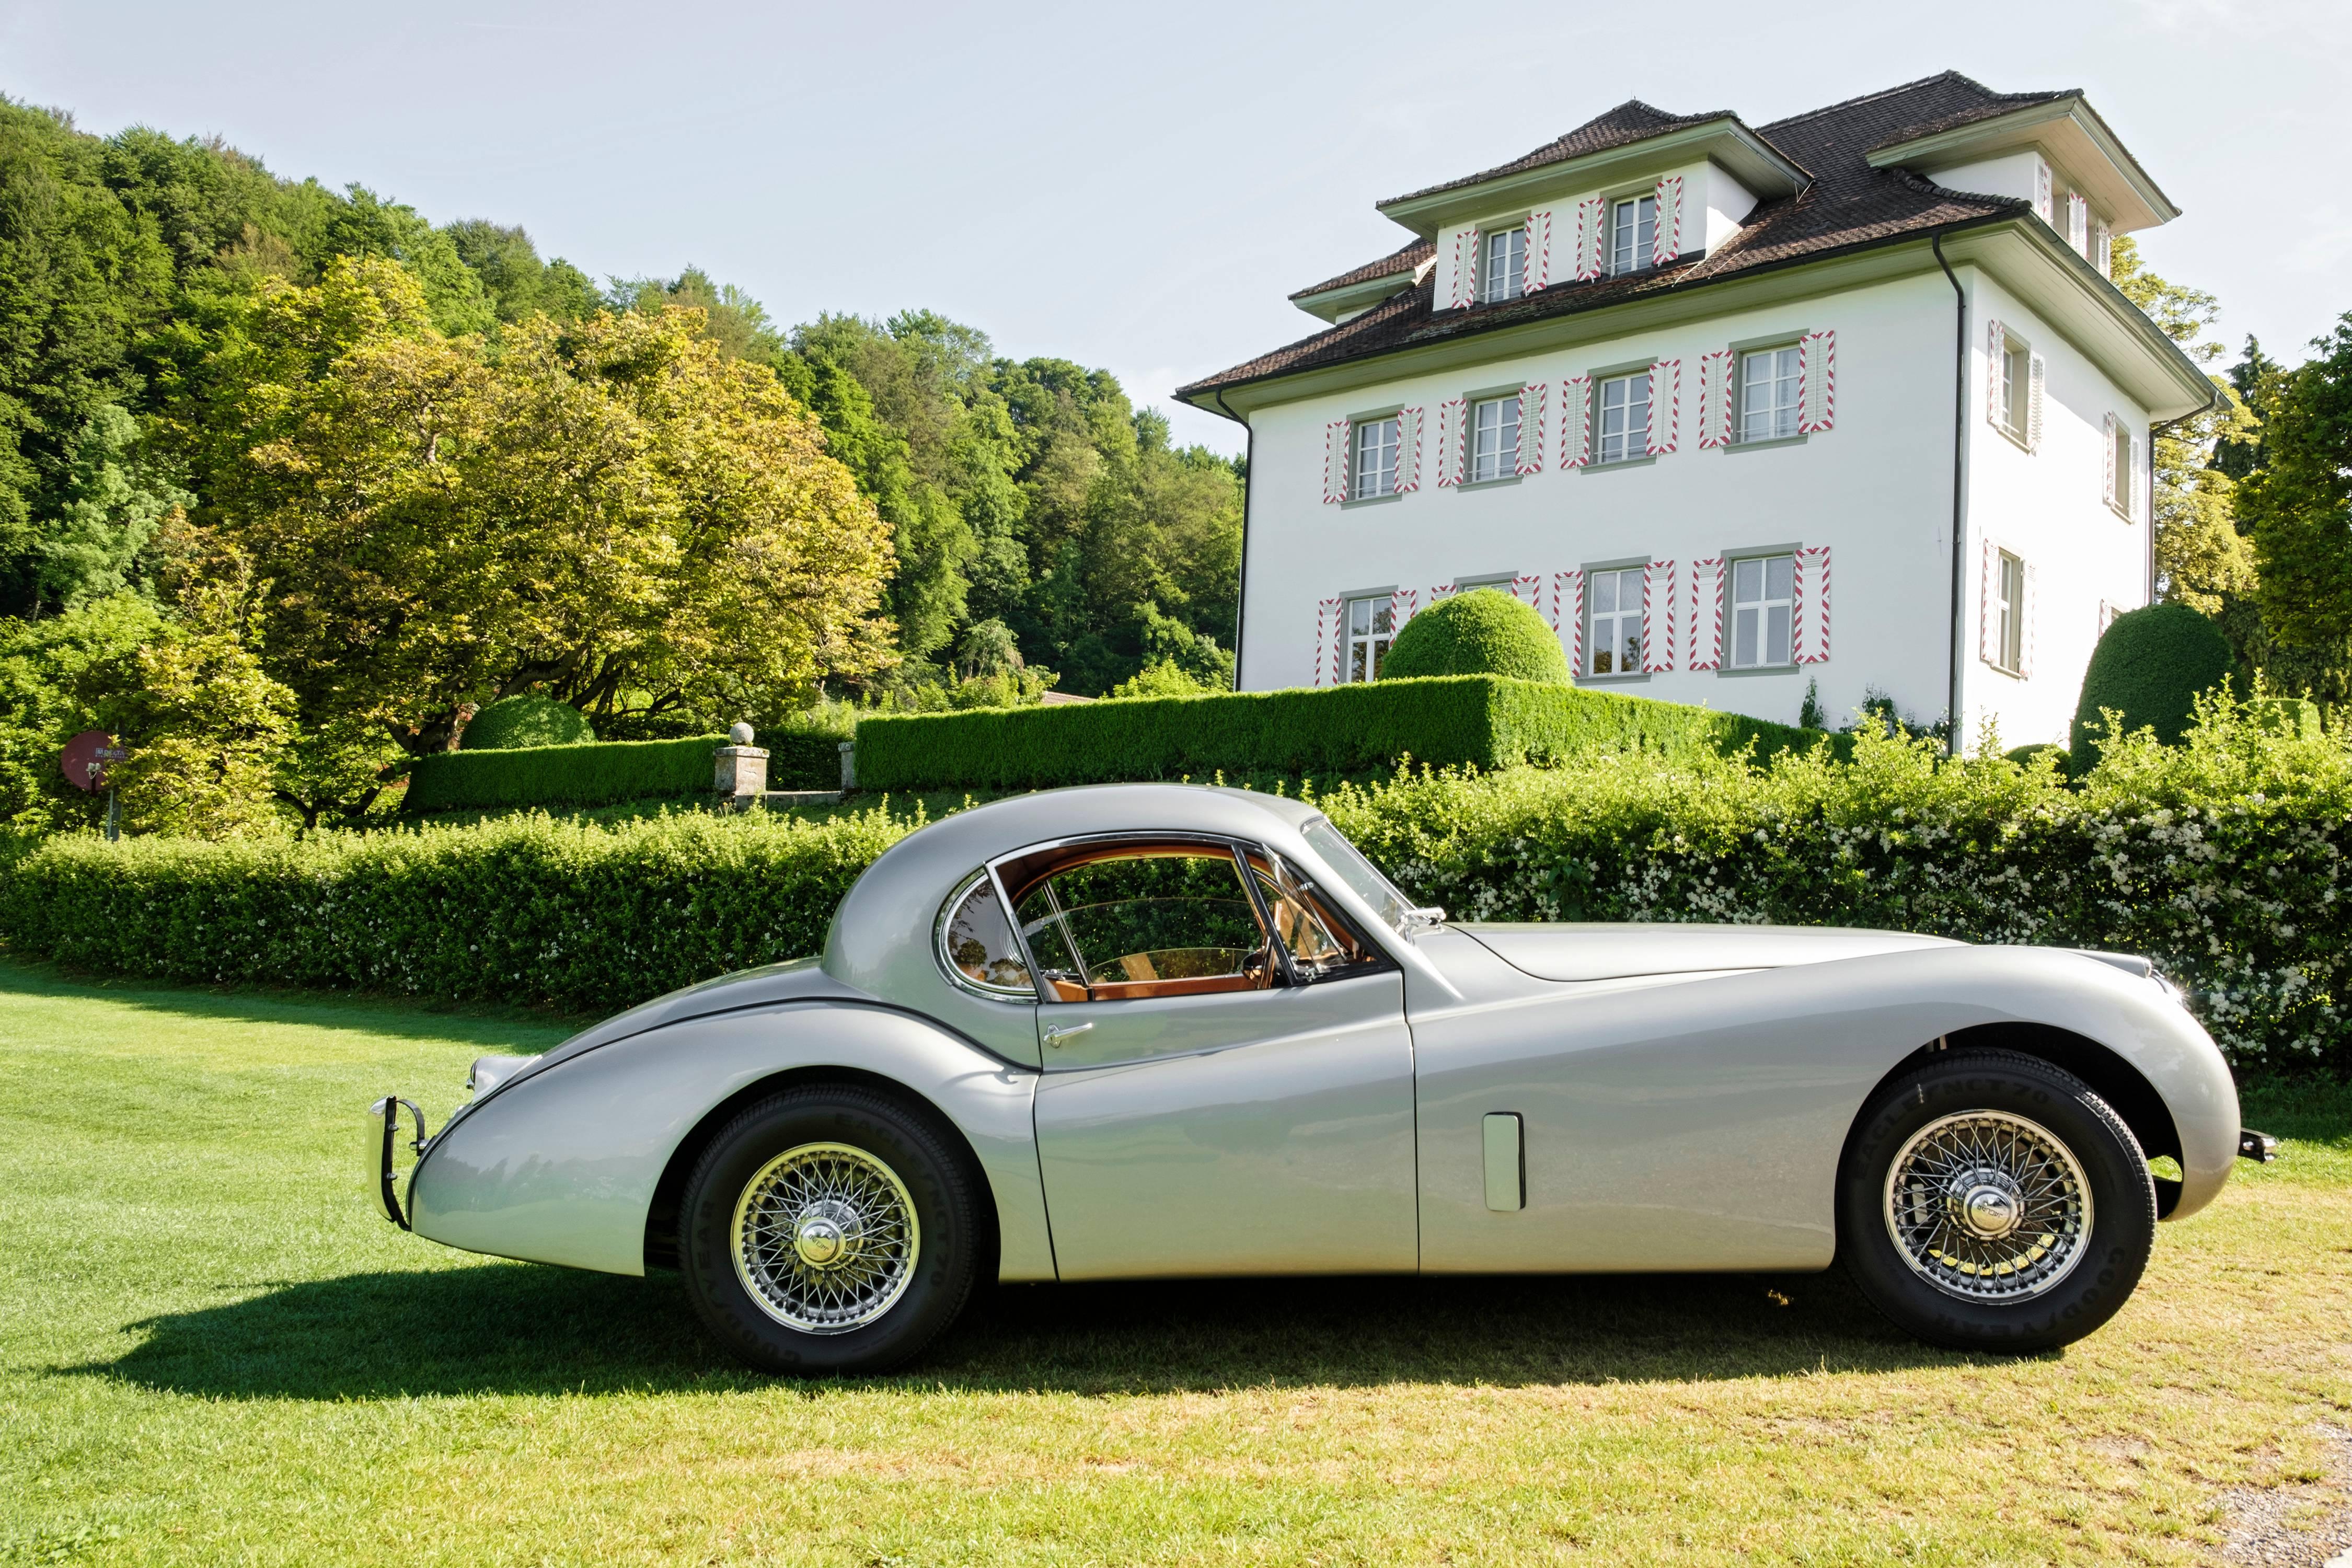 Spectacular silver Jaguar XK 120.
This fixed head coupé is left-hand drive. The silver exterior is complemented by a smooth leather interior in cognac. 

- 6-cylinder engine
- Chassis 680523
- First driven January 03 1952
- 5 gears and only